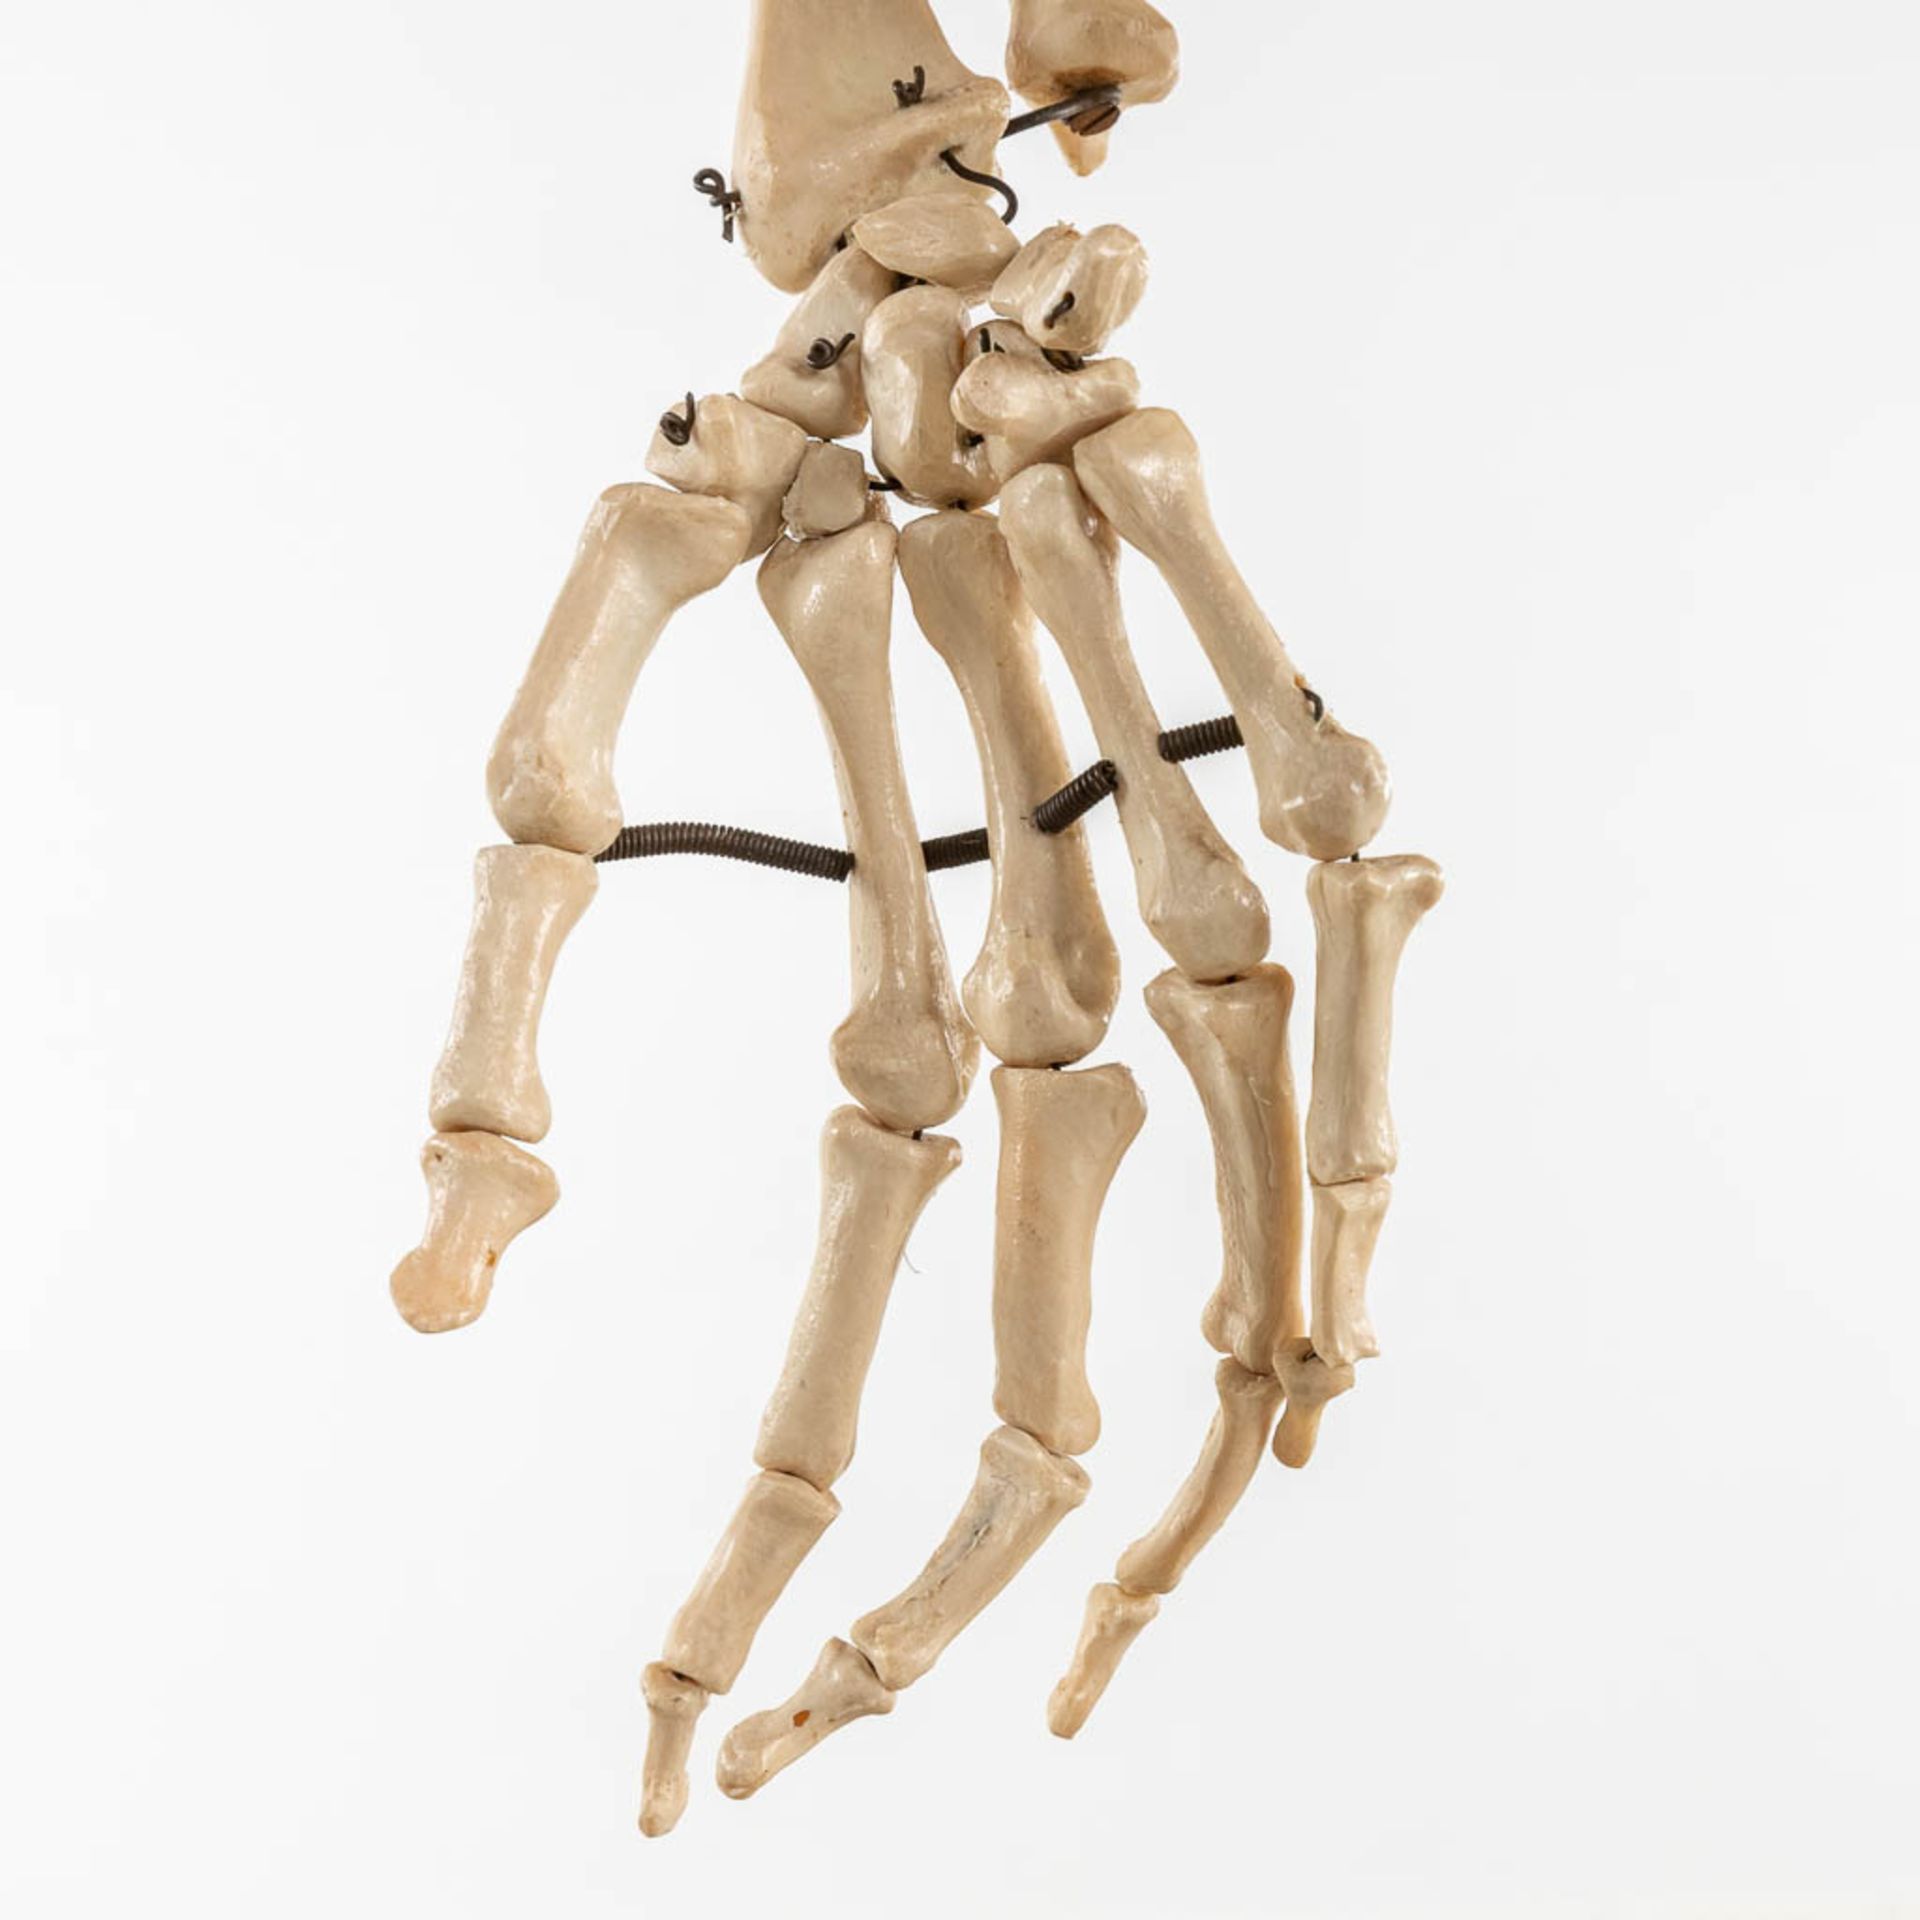 A mid-century antomical model of a skeleton, resine. Circa 1950. (W:40 x H:183 cm) - Image 12 of 14